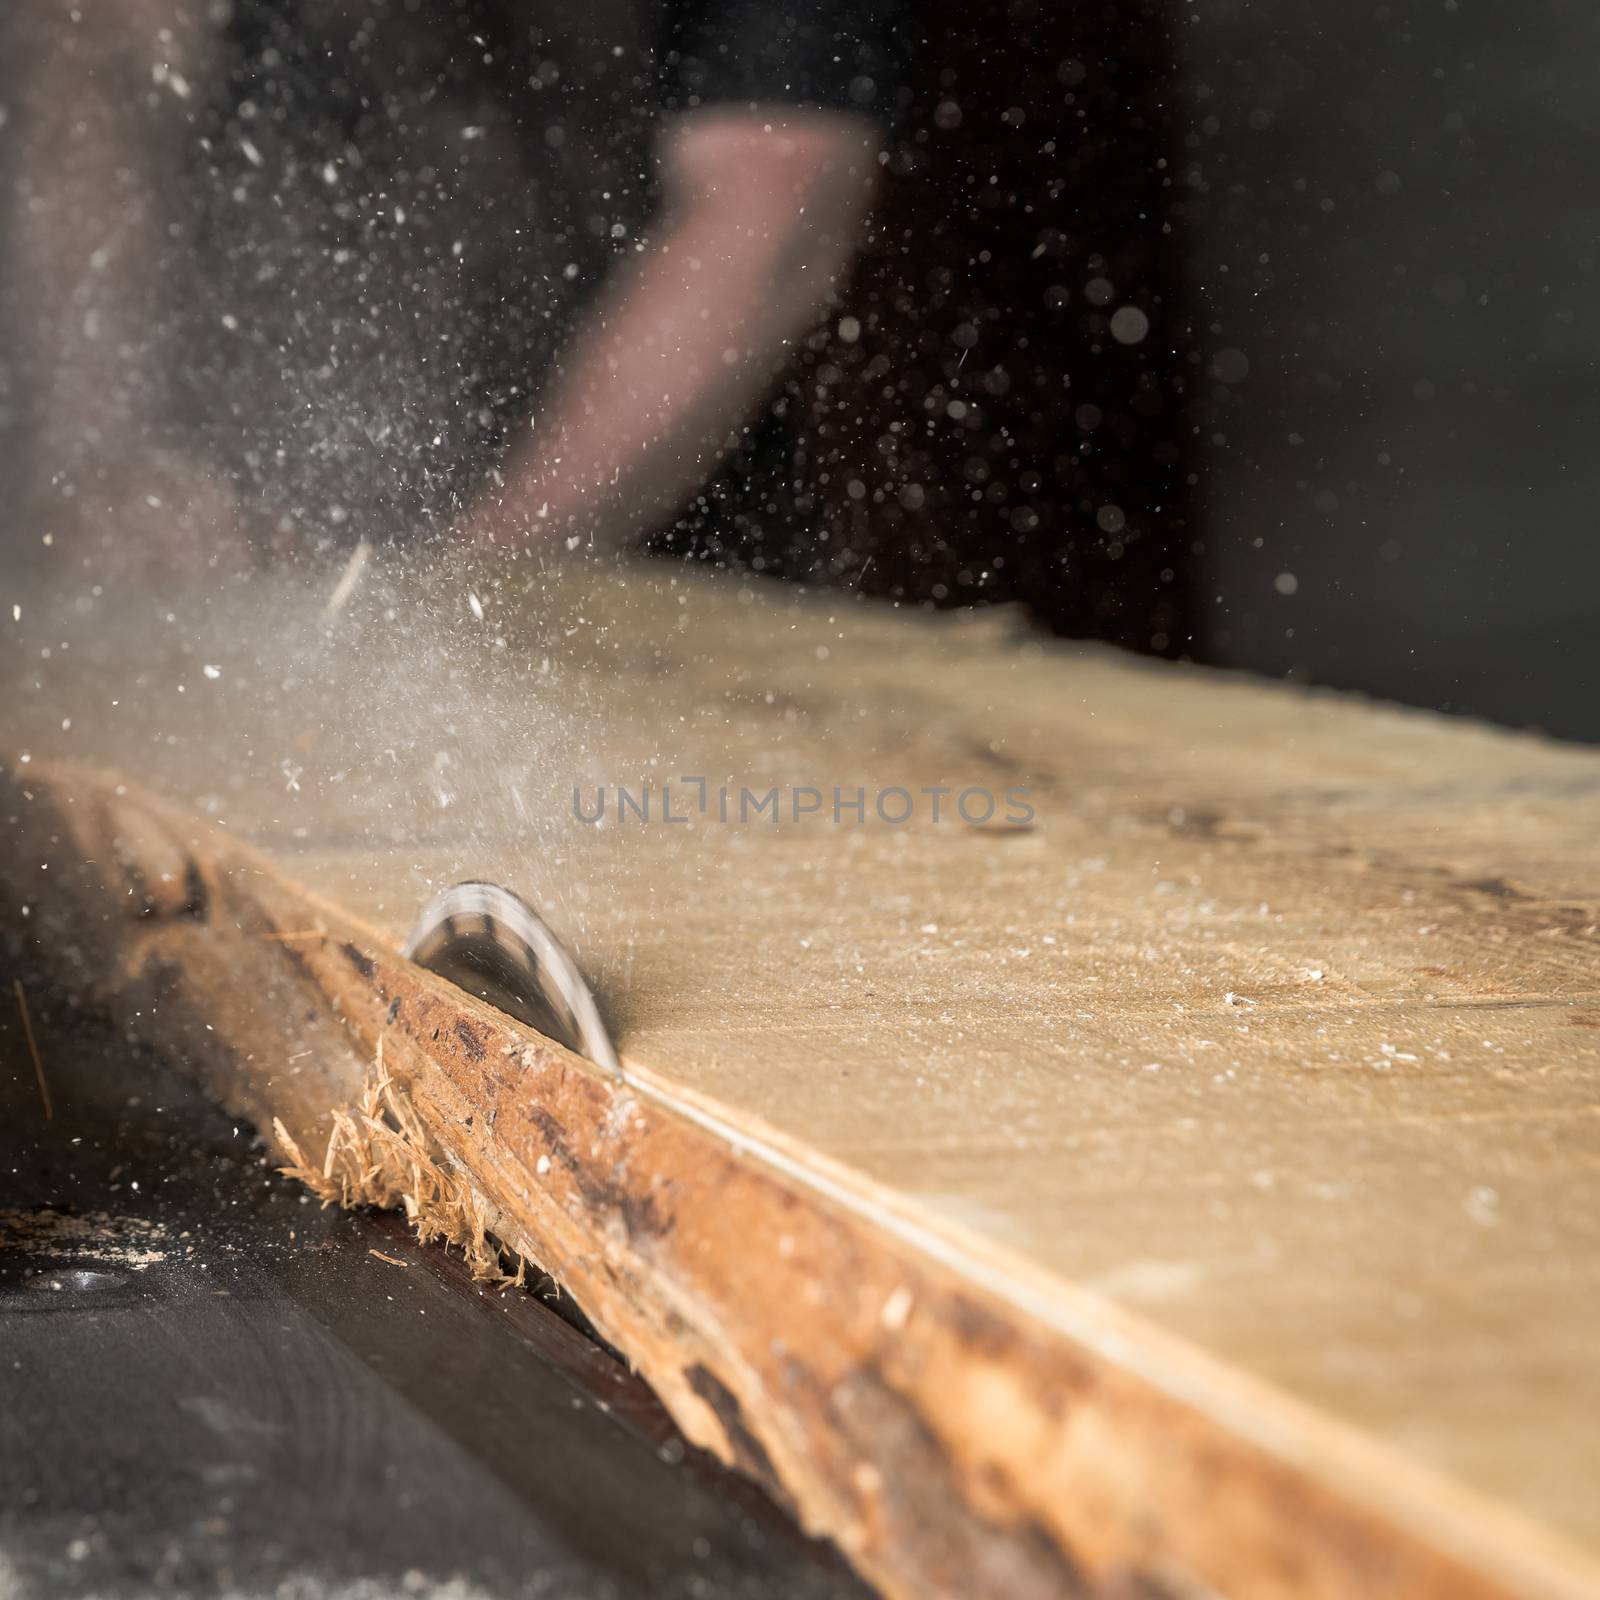 A man cuts wood on a circular saw in a joinery by Edophoto